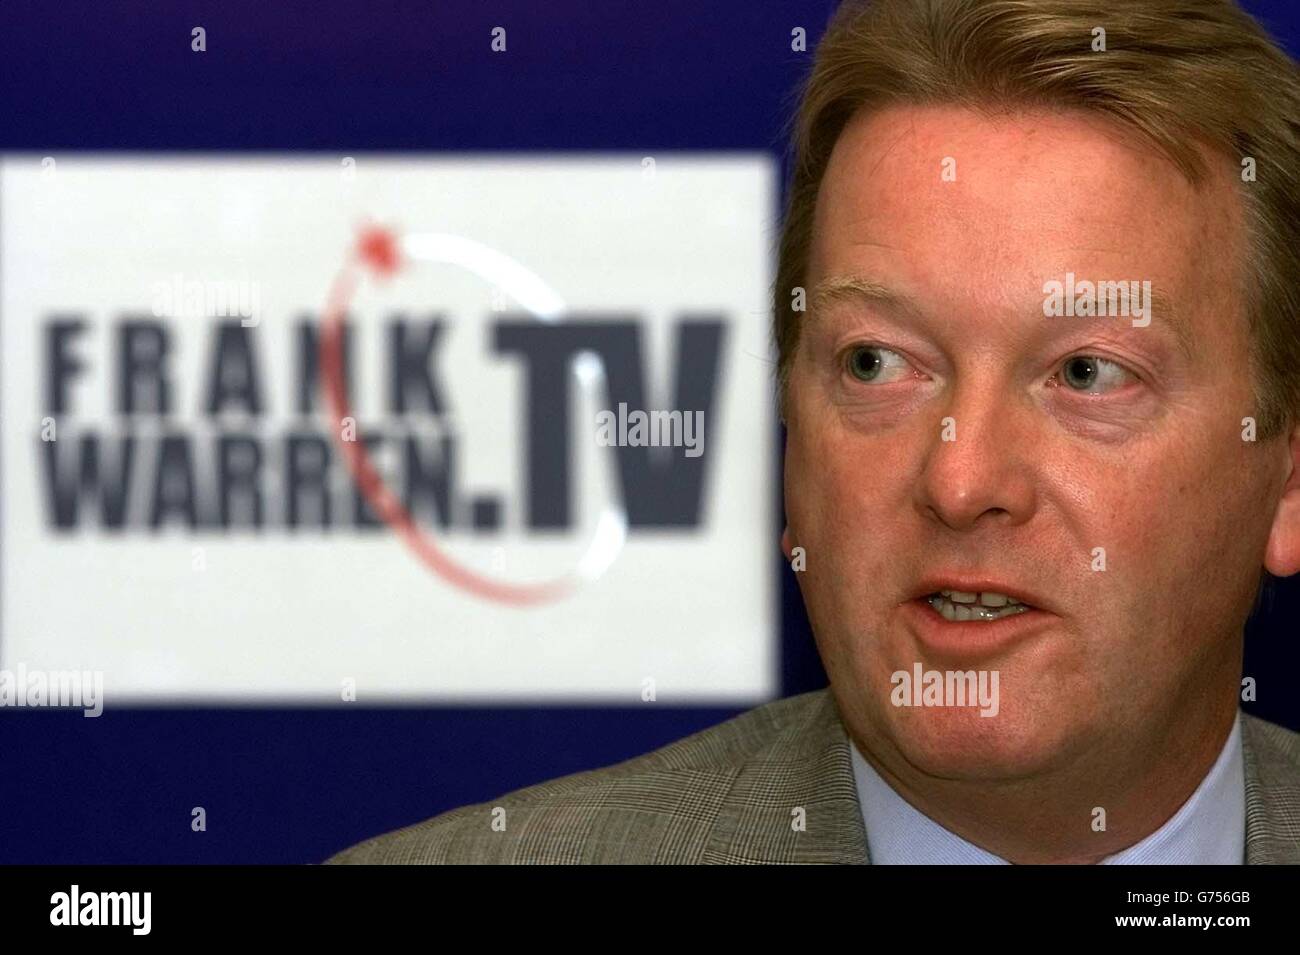 Boxing promoter Frank Warren speaks at a press conference at The Park Lane Hotel, London, following the launch of 'Shobox:the new generation' on Frank Warren TV in association with shobox from USA. Stock Photo